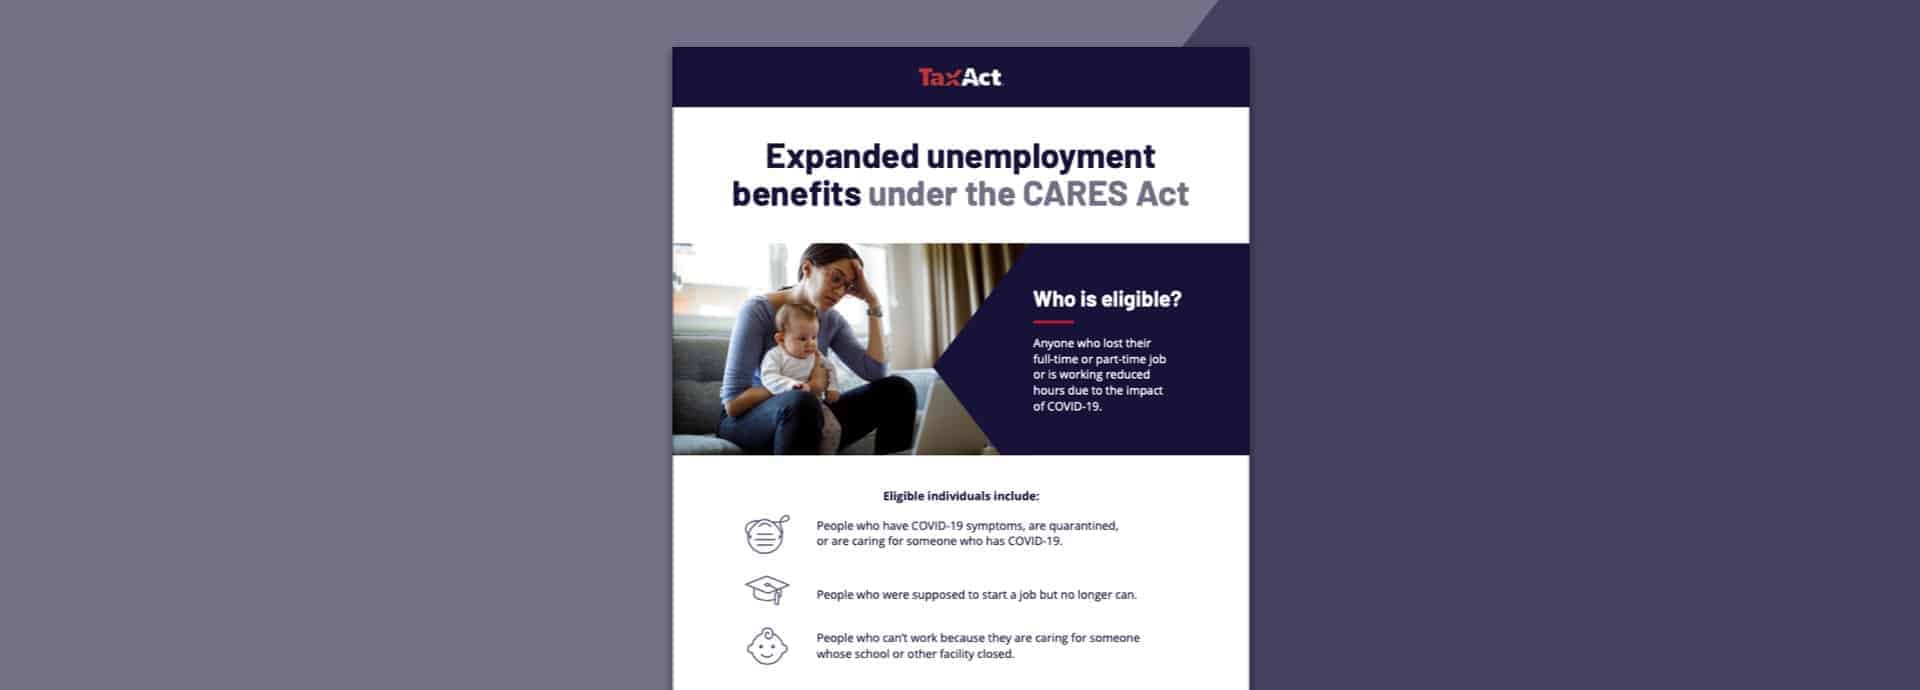 Infographics on "Expanded unemployment benefits under the CARES Act"